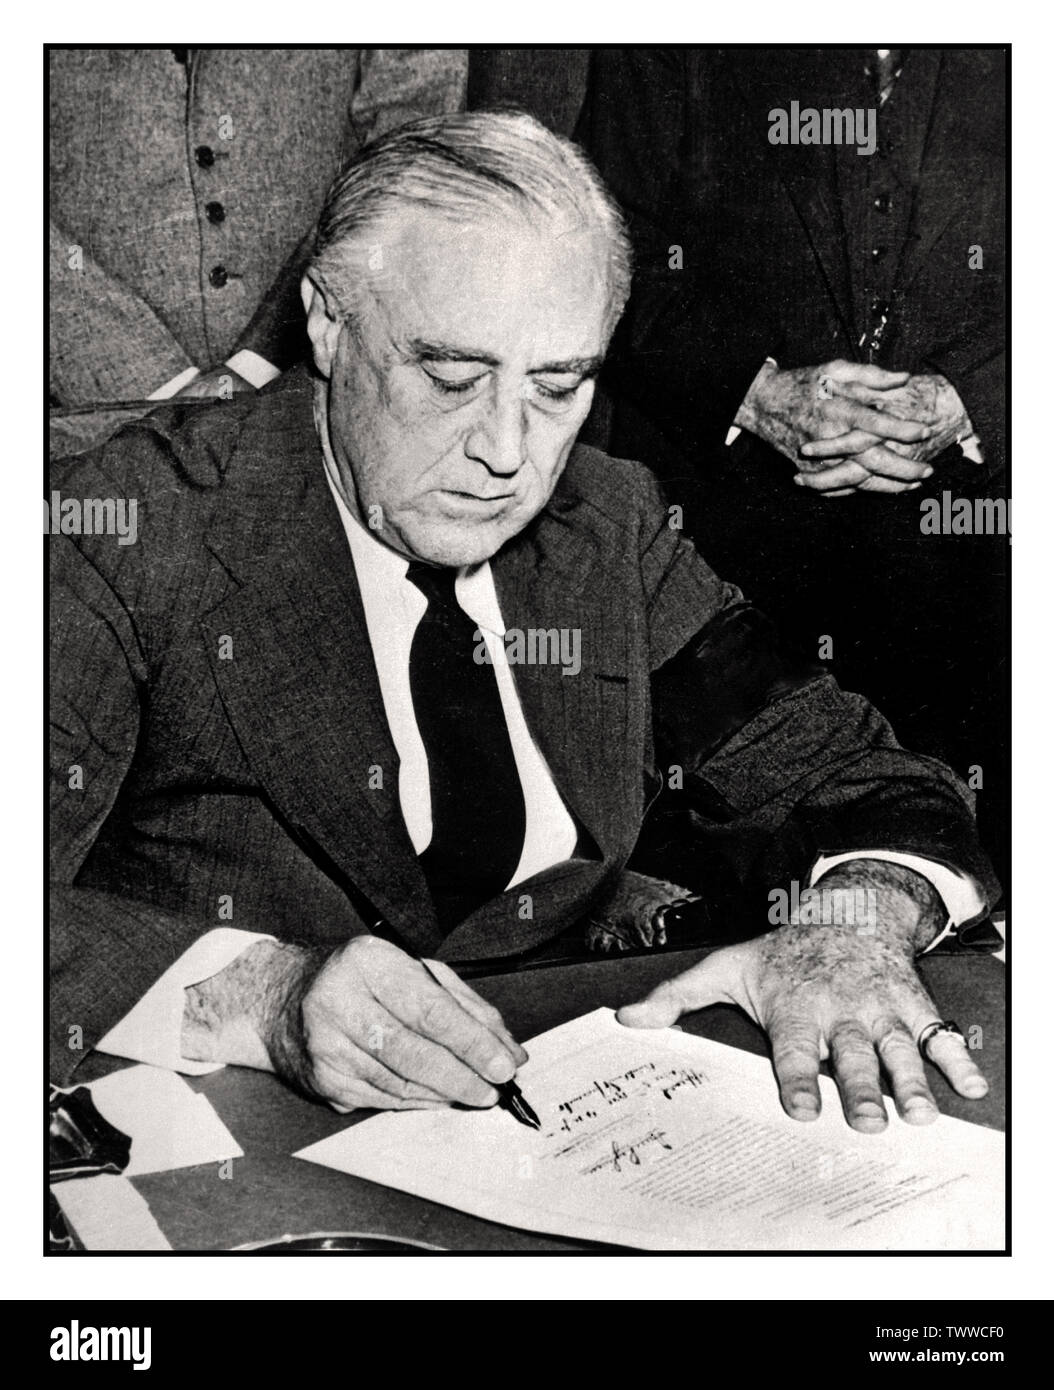 President Franklin D. Rossevelt signing the declaration of war against Japan, December 8, 1941. USA United States did not intervene in WW2 until after Japanese planes bombed Pearl Harbor in 1941. As Japan had an alliance with Germany and Italy, both nations declared war on the United States on December 11th, 1941, four days after the Pearl Harbor attack. Stock Photo